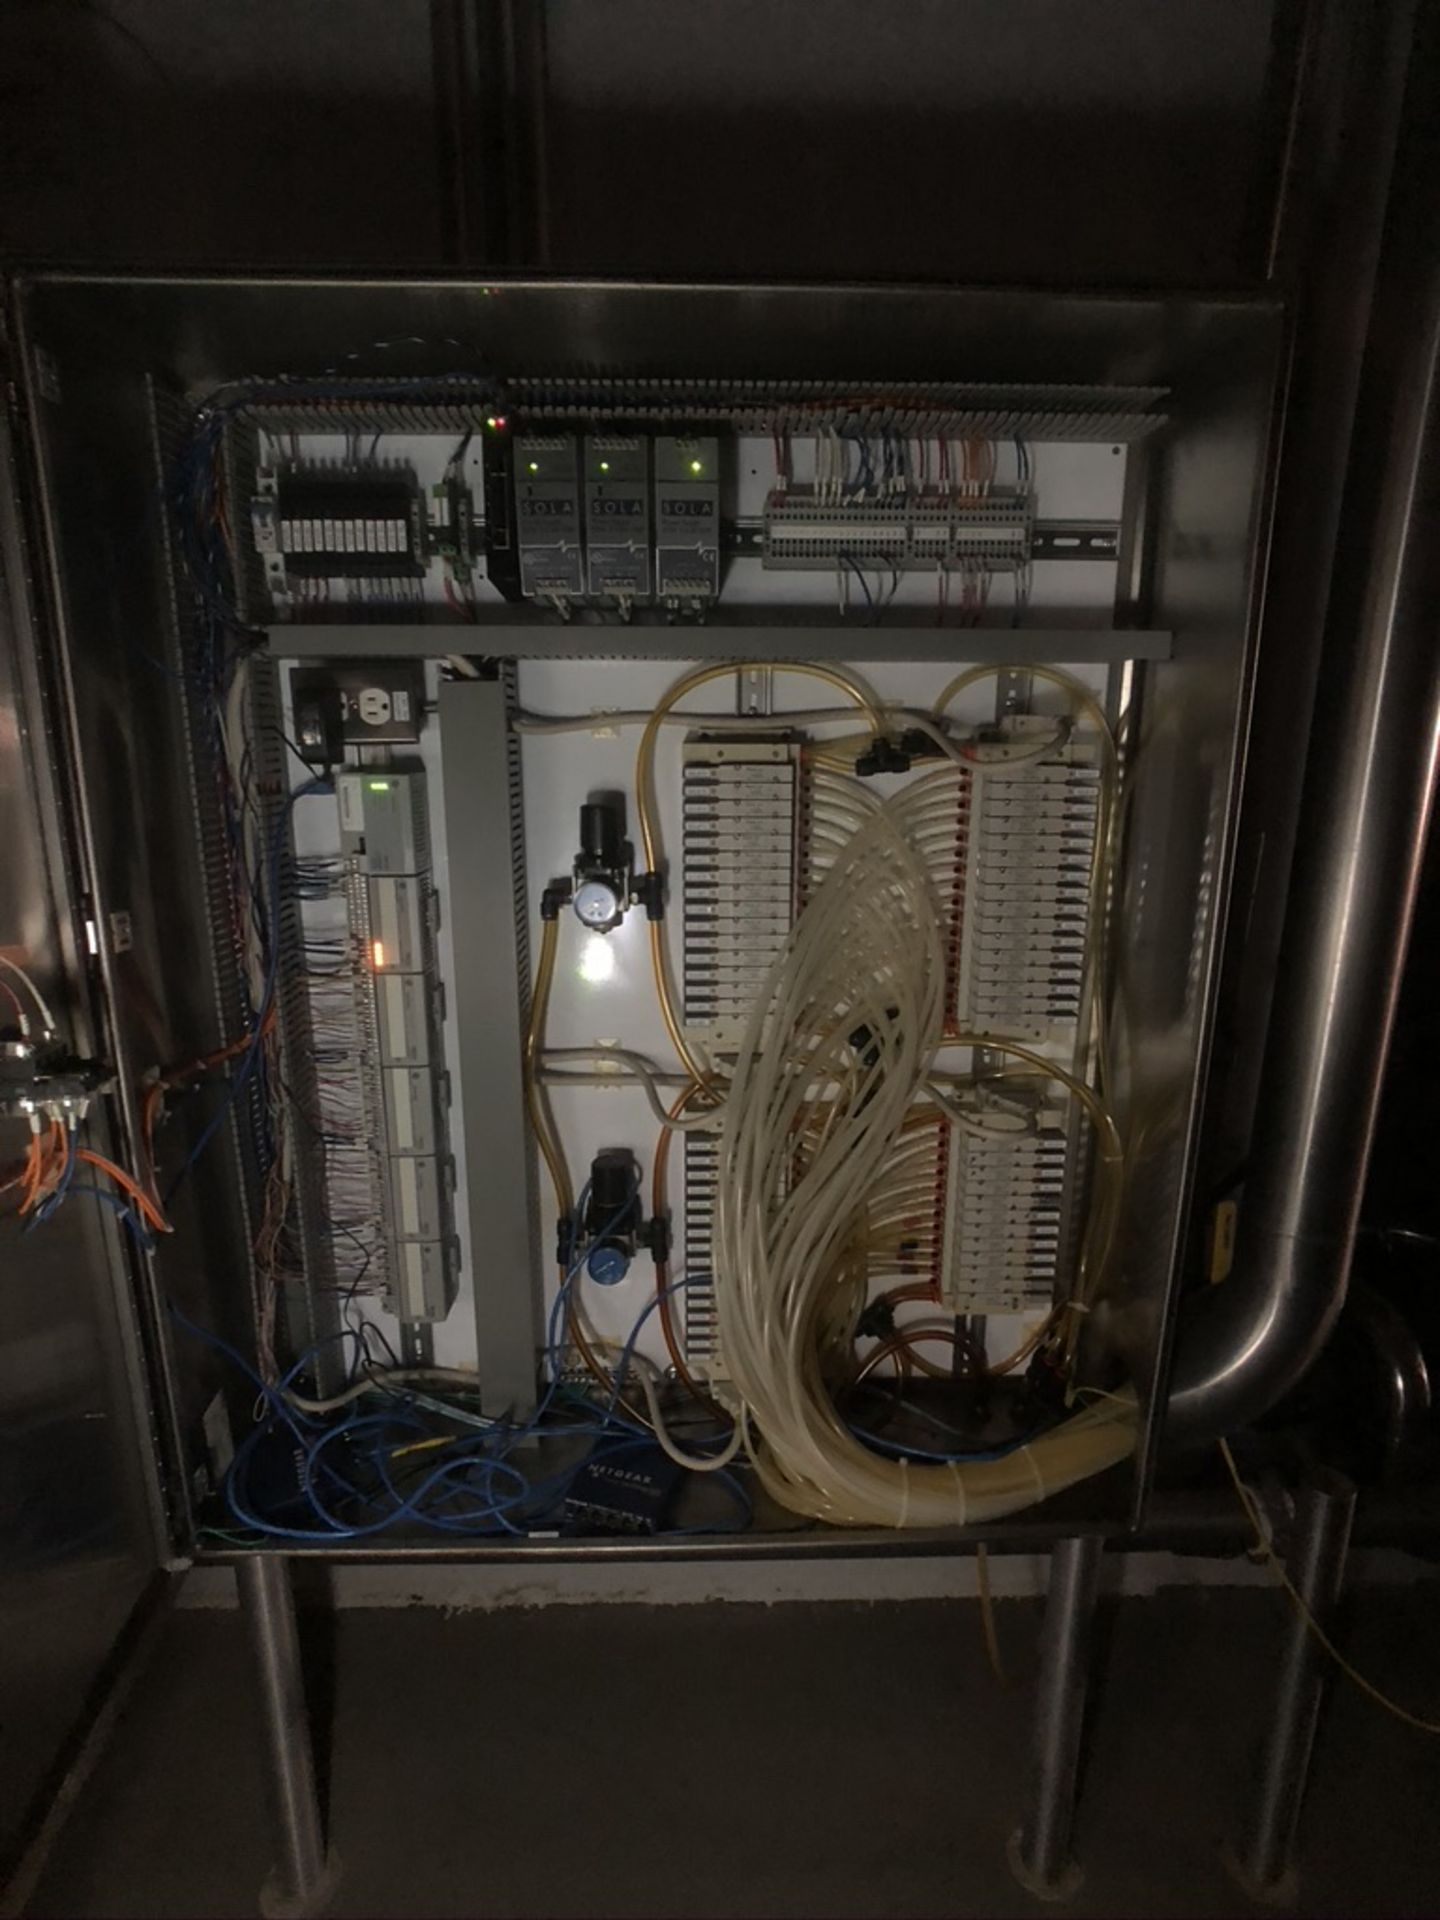 NORTHWOODS ELECTRICAL AND CONTROL SYSTEMS, S/S RAW RECEIVING CONTROL PLC CABINET, ALLEN-BRADLEY FLEX - Image 2 of 5